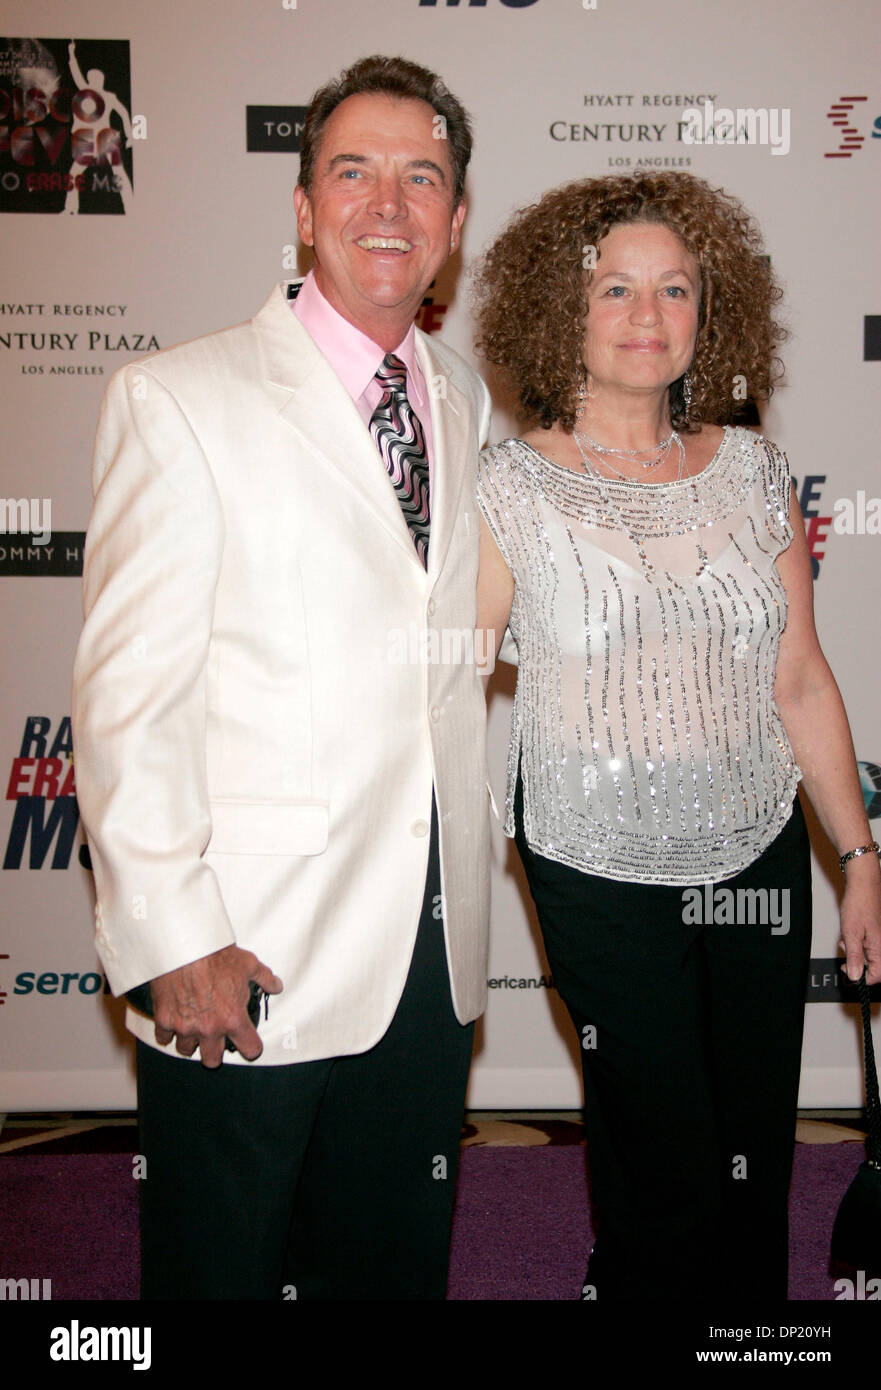 May 12, 2006; Century City, California, USA; Actor GREGORY ITZIN & Wife JUDIE at the 13th Annual Race To Erase MS Gala held at the Hyatt Regency Century Plaza Hotel. Mandatory Credit: Photo by Lisa O'Connor/ZUMA Press. (©) Copyright 2006 by Lisa O'Connor Stock Photo